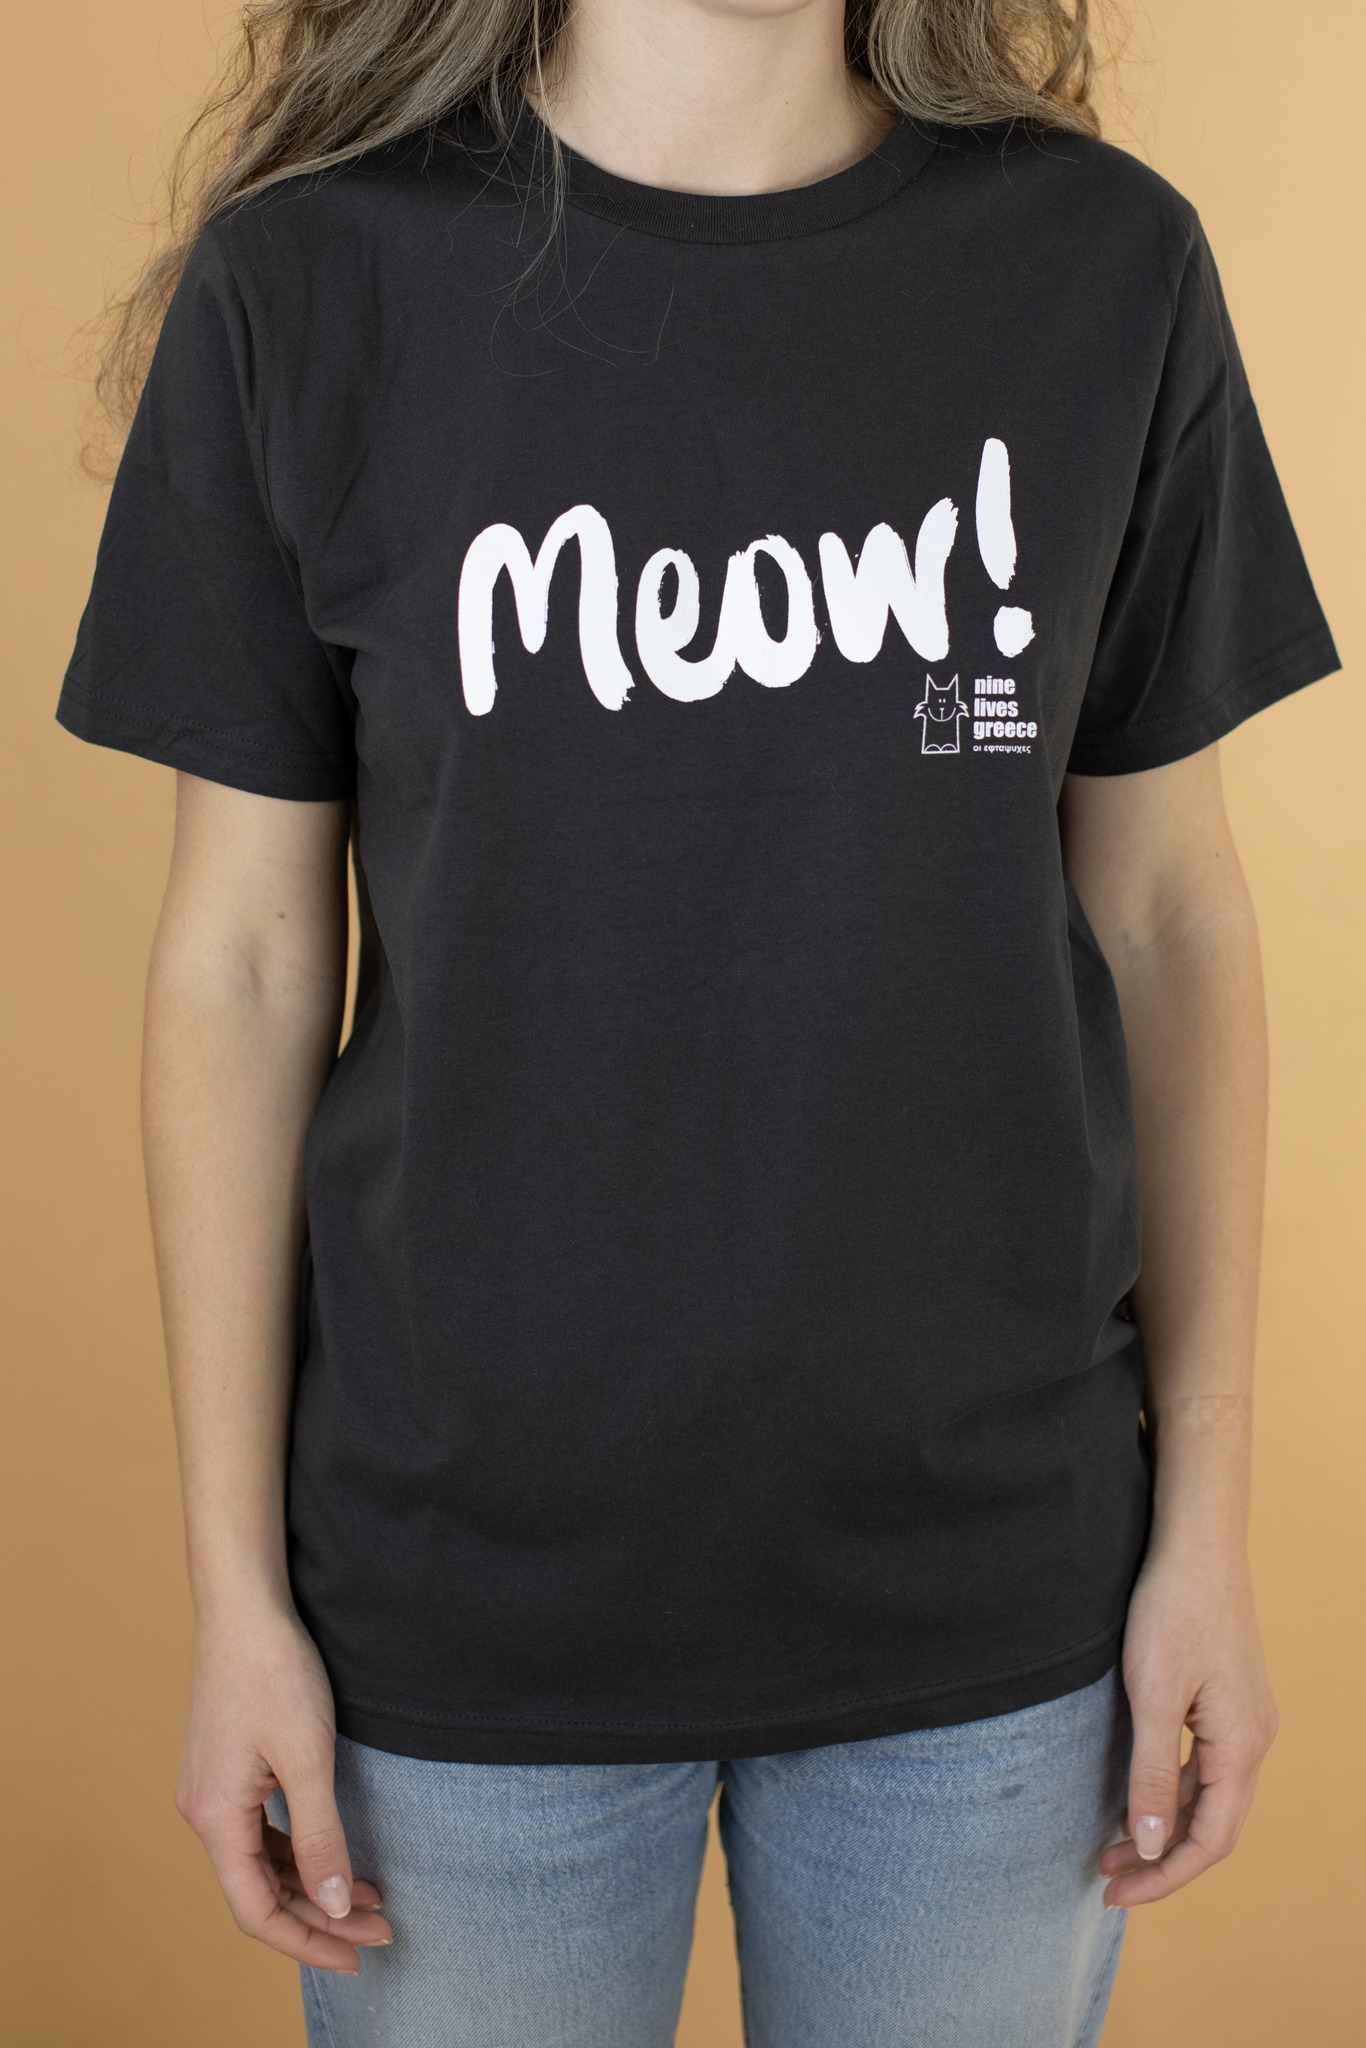 Black t-shirt with the word Meow printed on it.